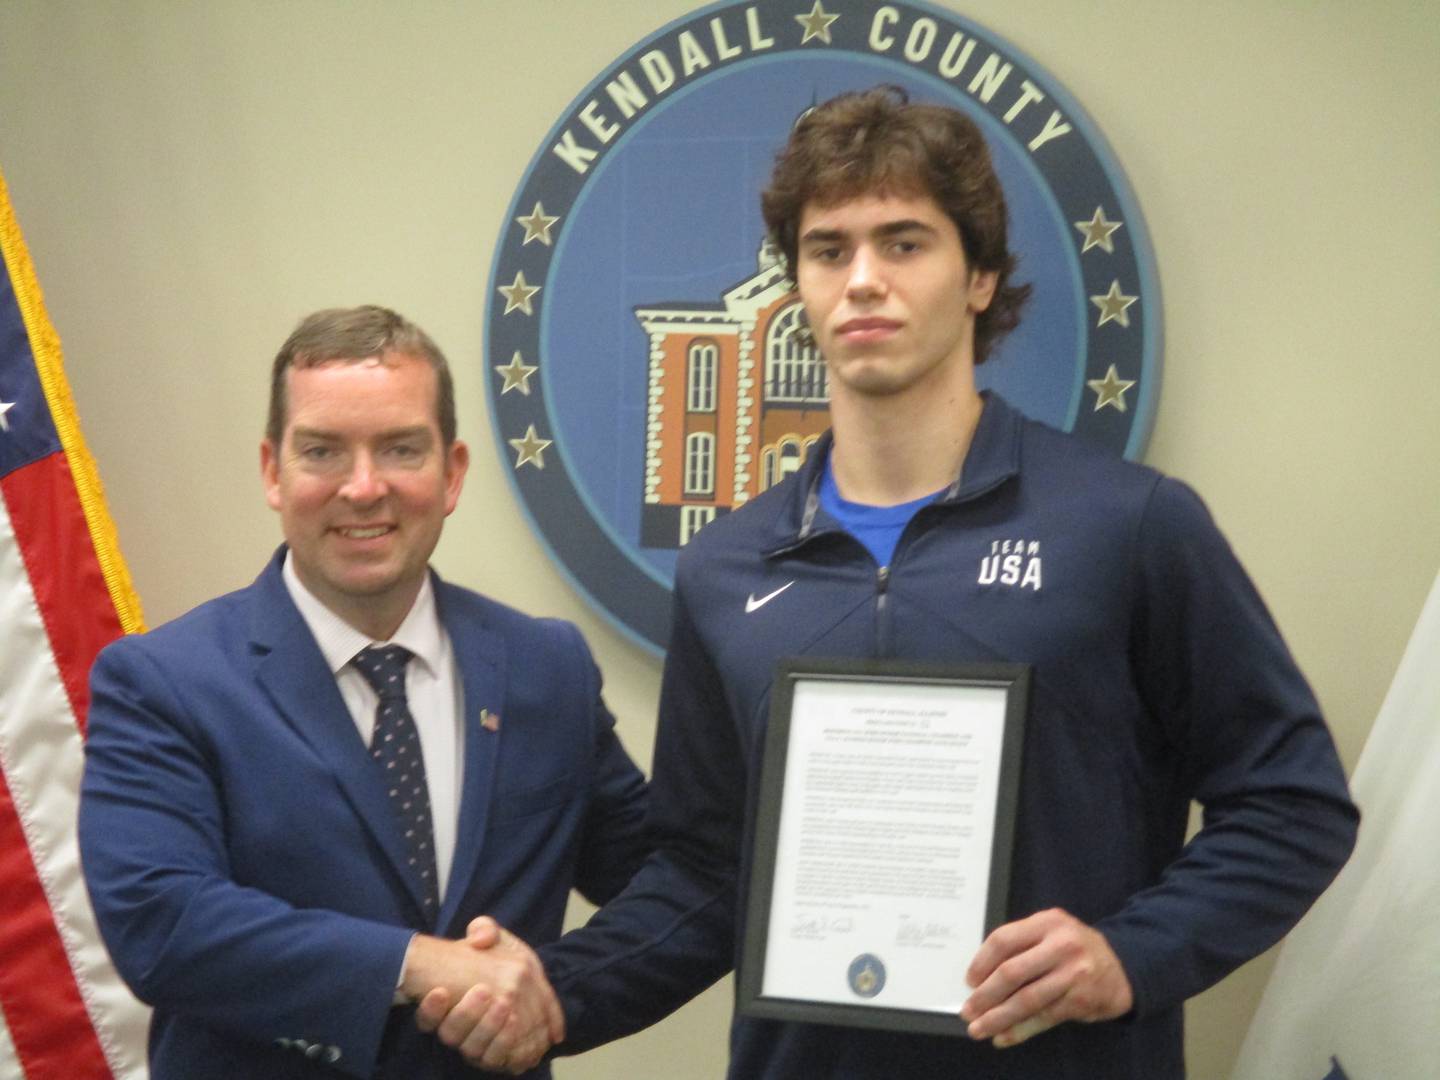 Kendall County Board Chairman Scott Gryder presents Yorkville judo champion Alex Knauf with honors for his athletic success during the Sept. 20, 2022 regular meeting.